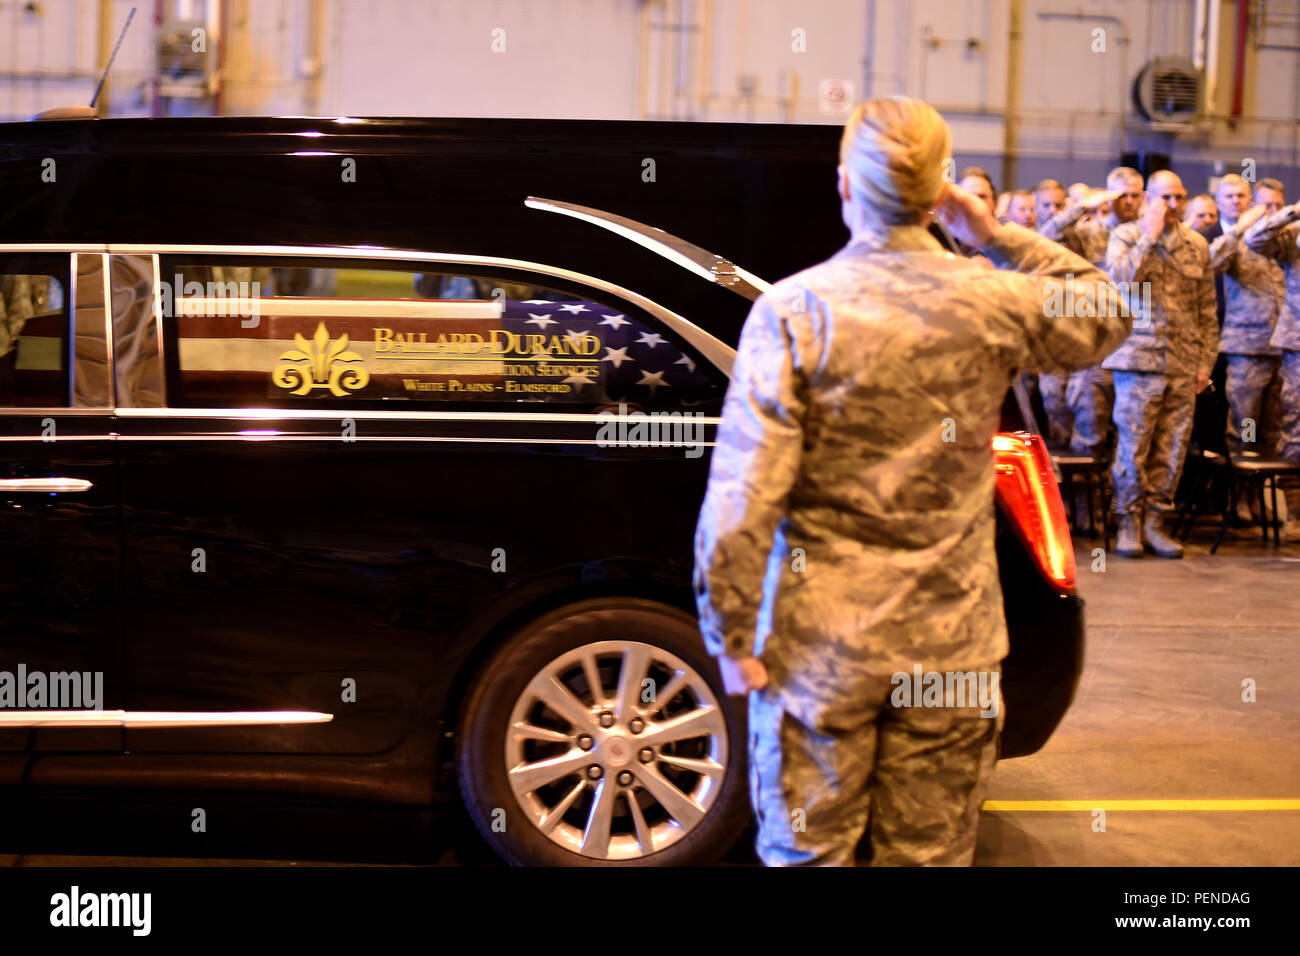 Members of the 105th Airlift Wing, based at Stewart Air National Guard Base, Newburgh, N.Y., participate in the dignified transfer ceremony of Tech. Sgt. Joseph G. Lemm on Dec. 28, 2015. Tech. Sgt. Lemm was killed in action while deployed to Bagram Air Field, Afghanistan, on Dec. 21, 2015. (U.S. Air National Guard photo by Tech. Sgt. Lee Guagenti/Released) Stock Photo